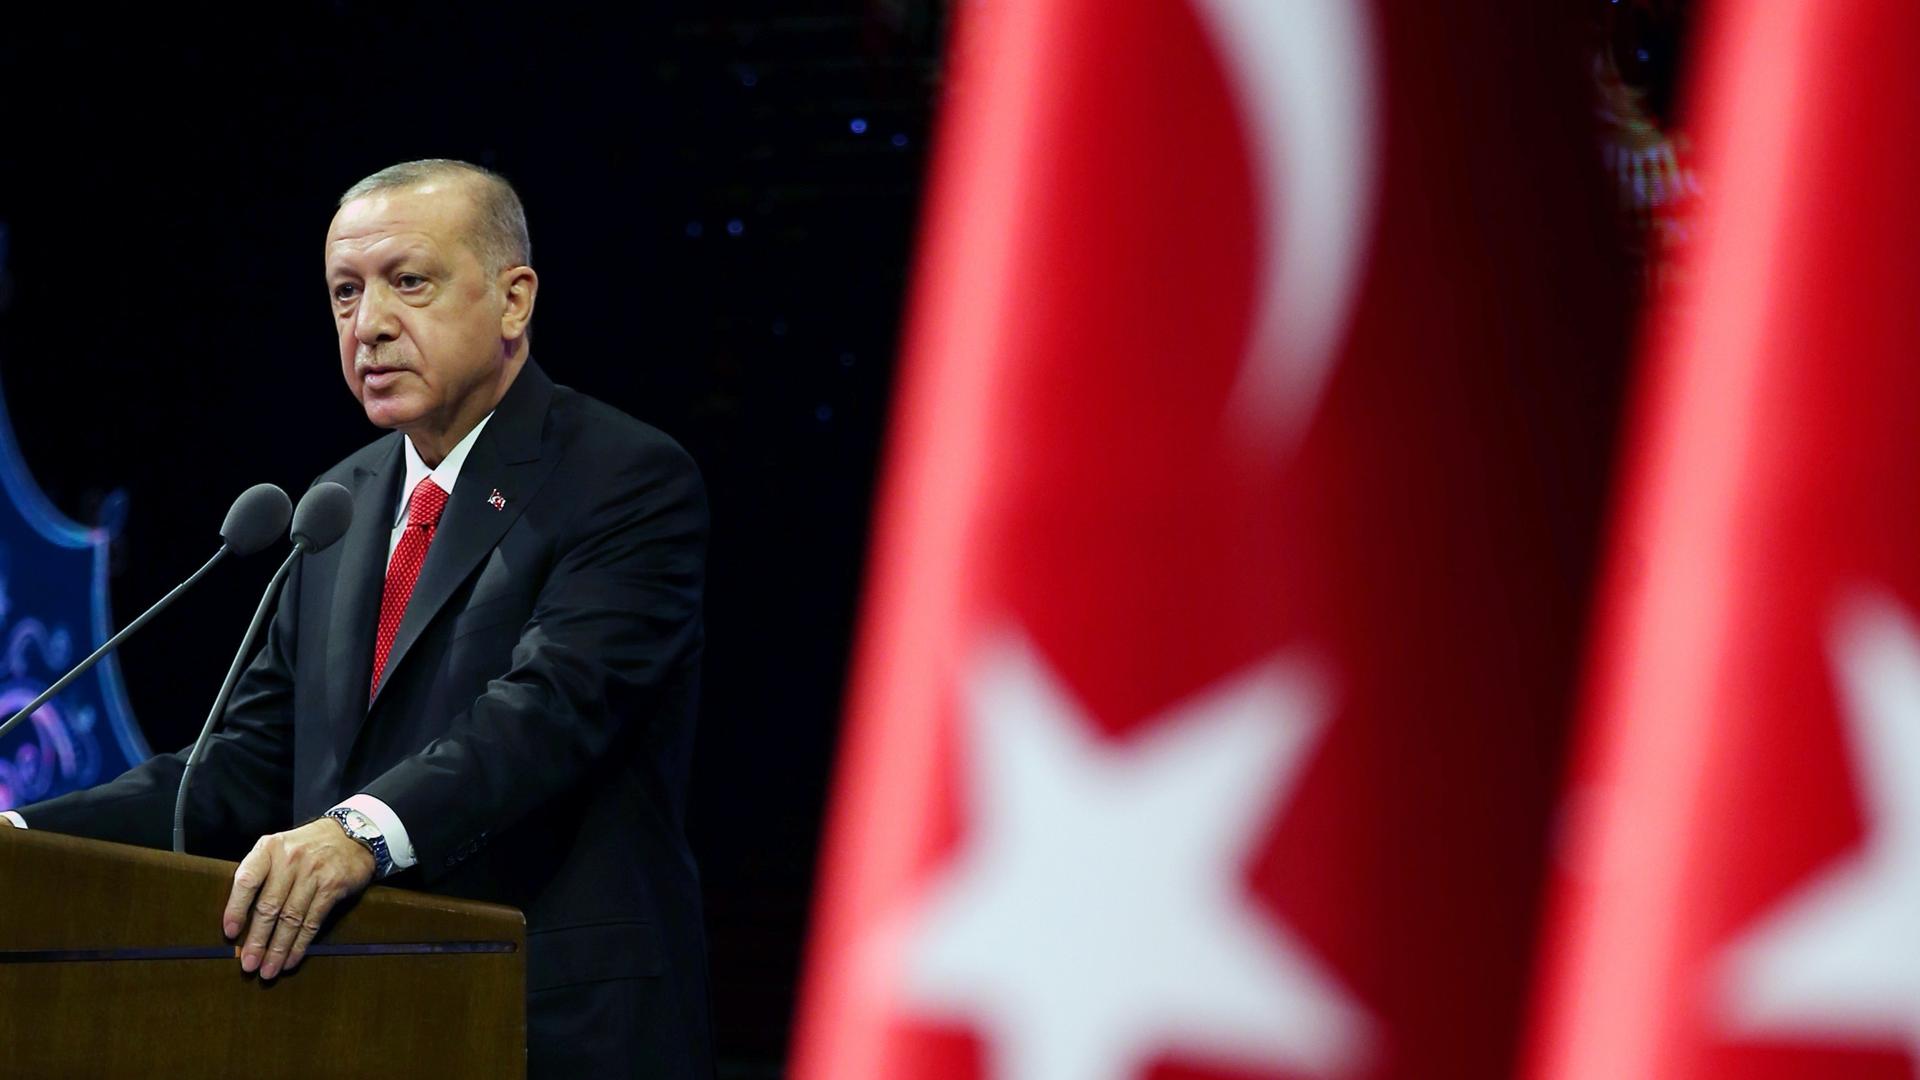 A man in a suit stands at a podium near red and white Turkish flag. 